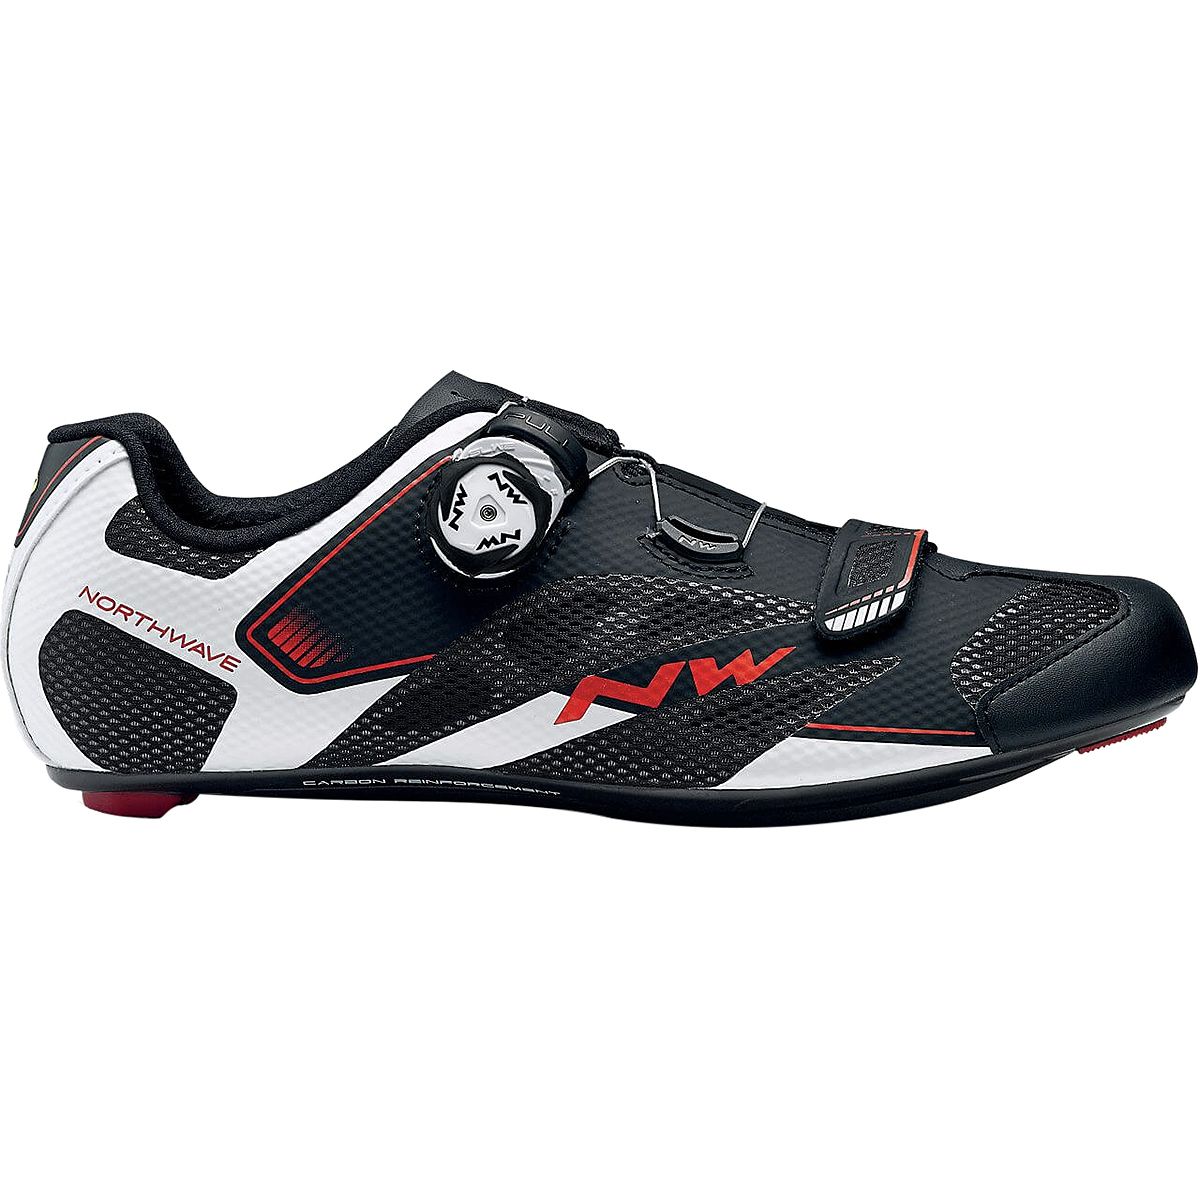 wide men's cycling shoes